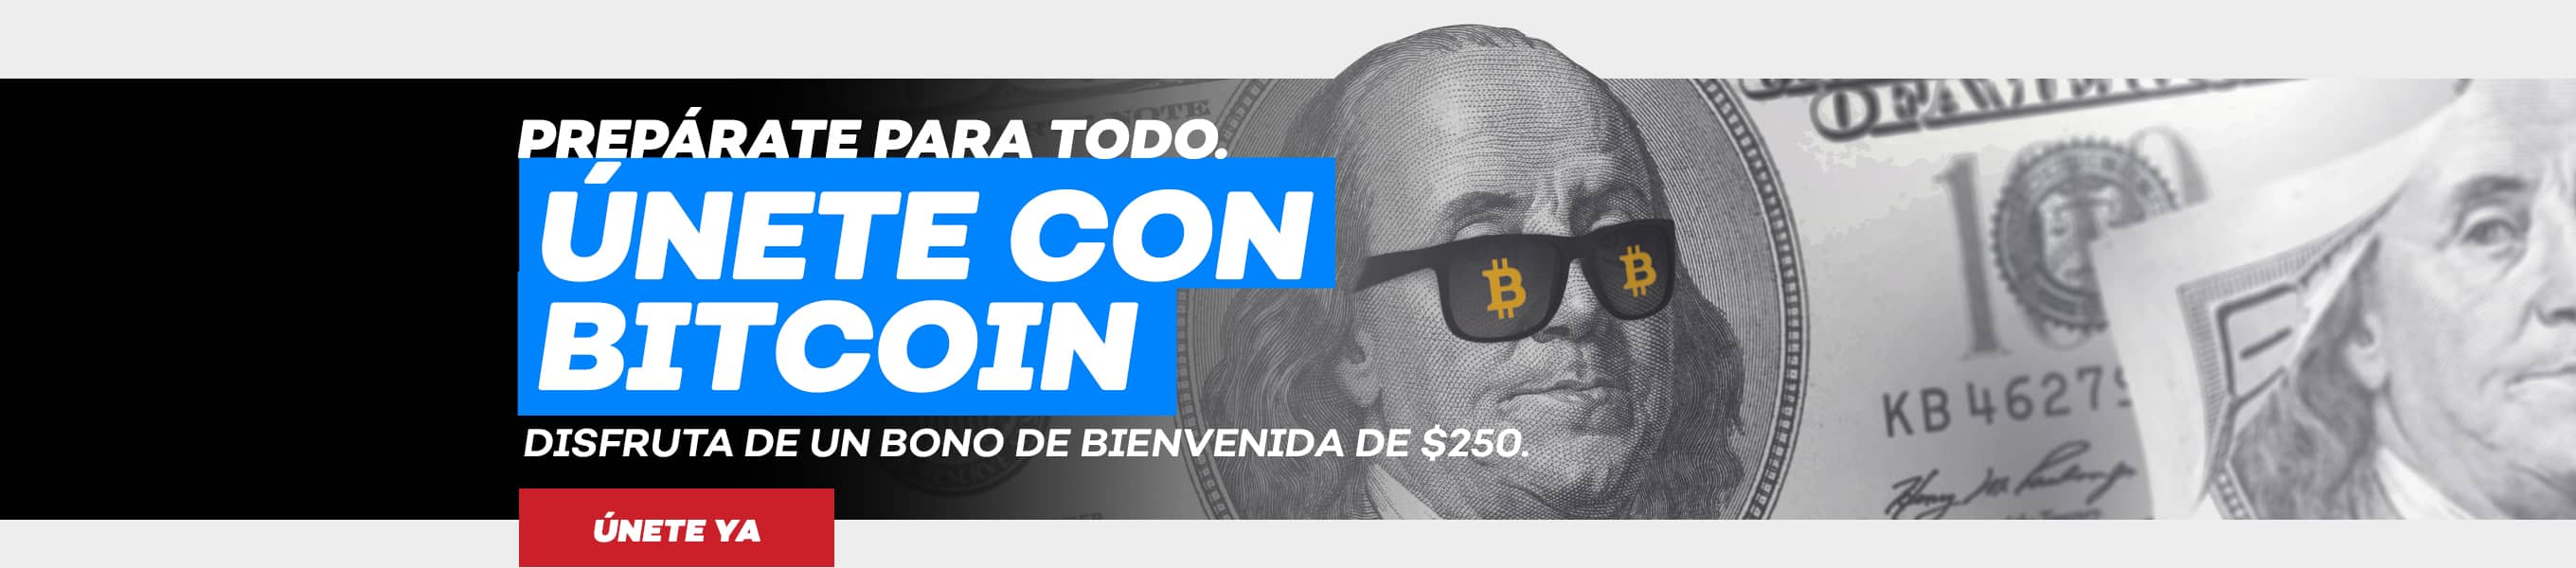 Bitcoin Promotions 